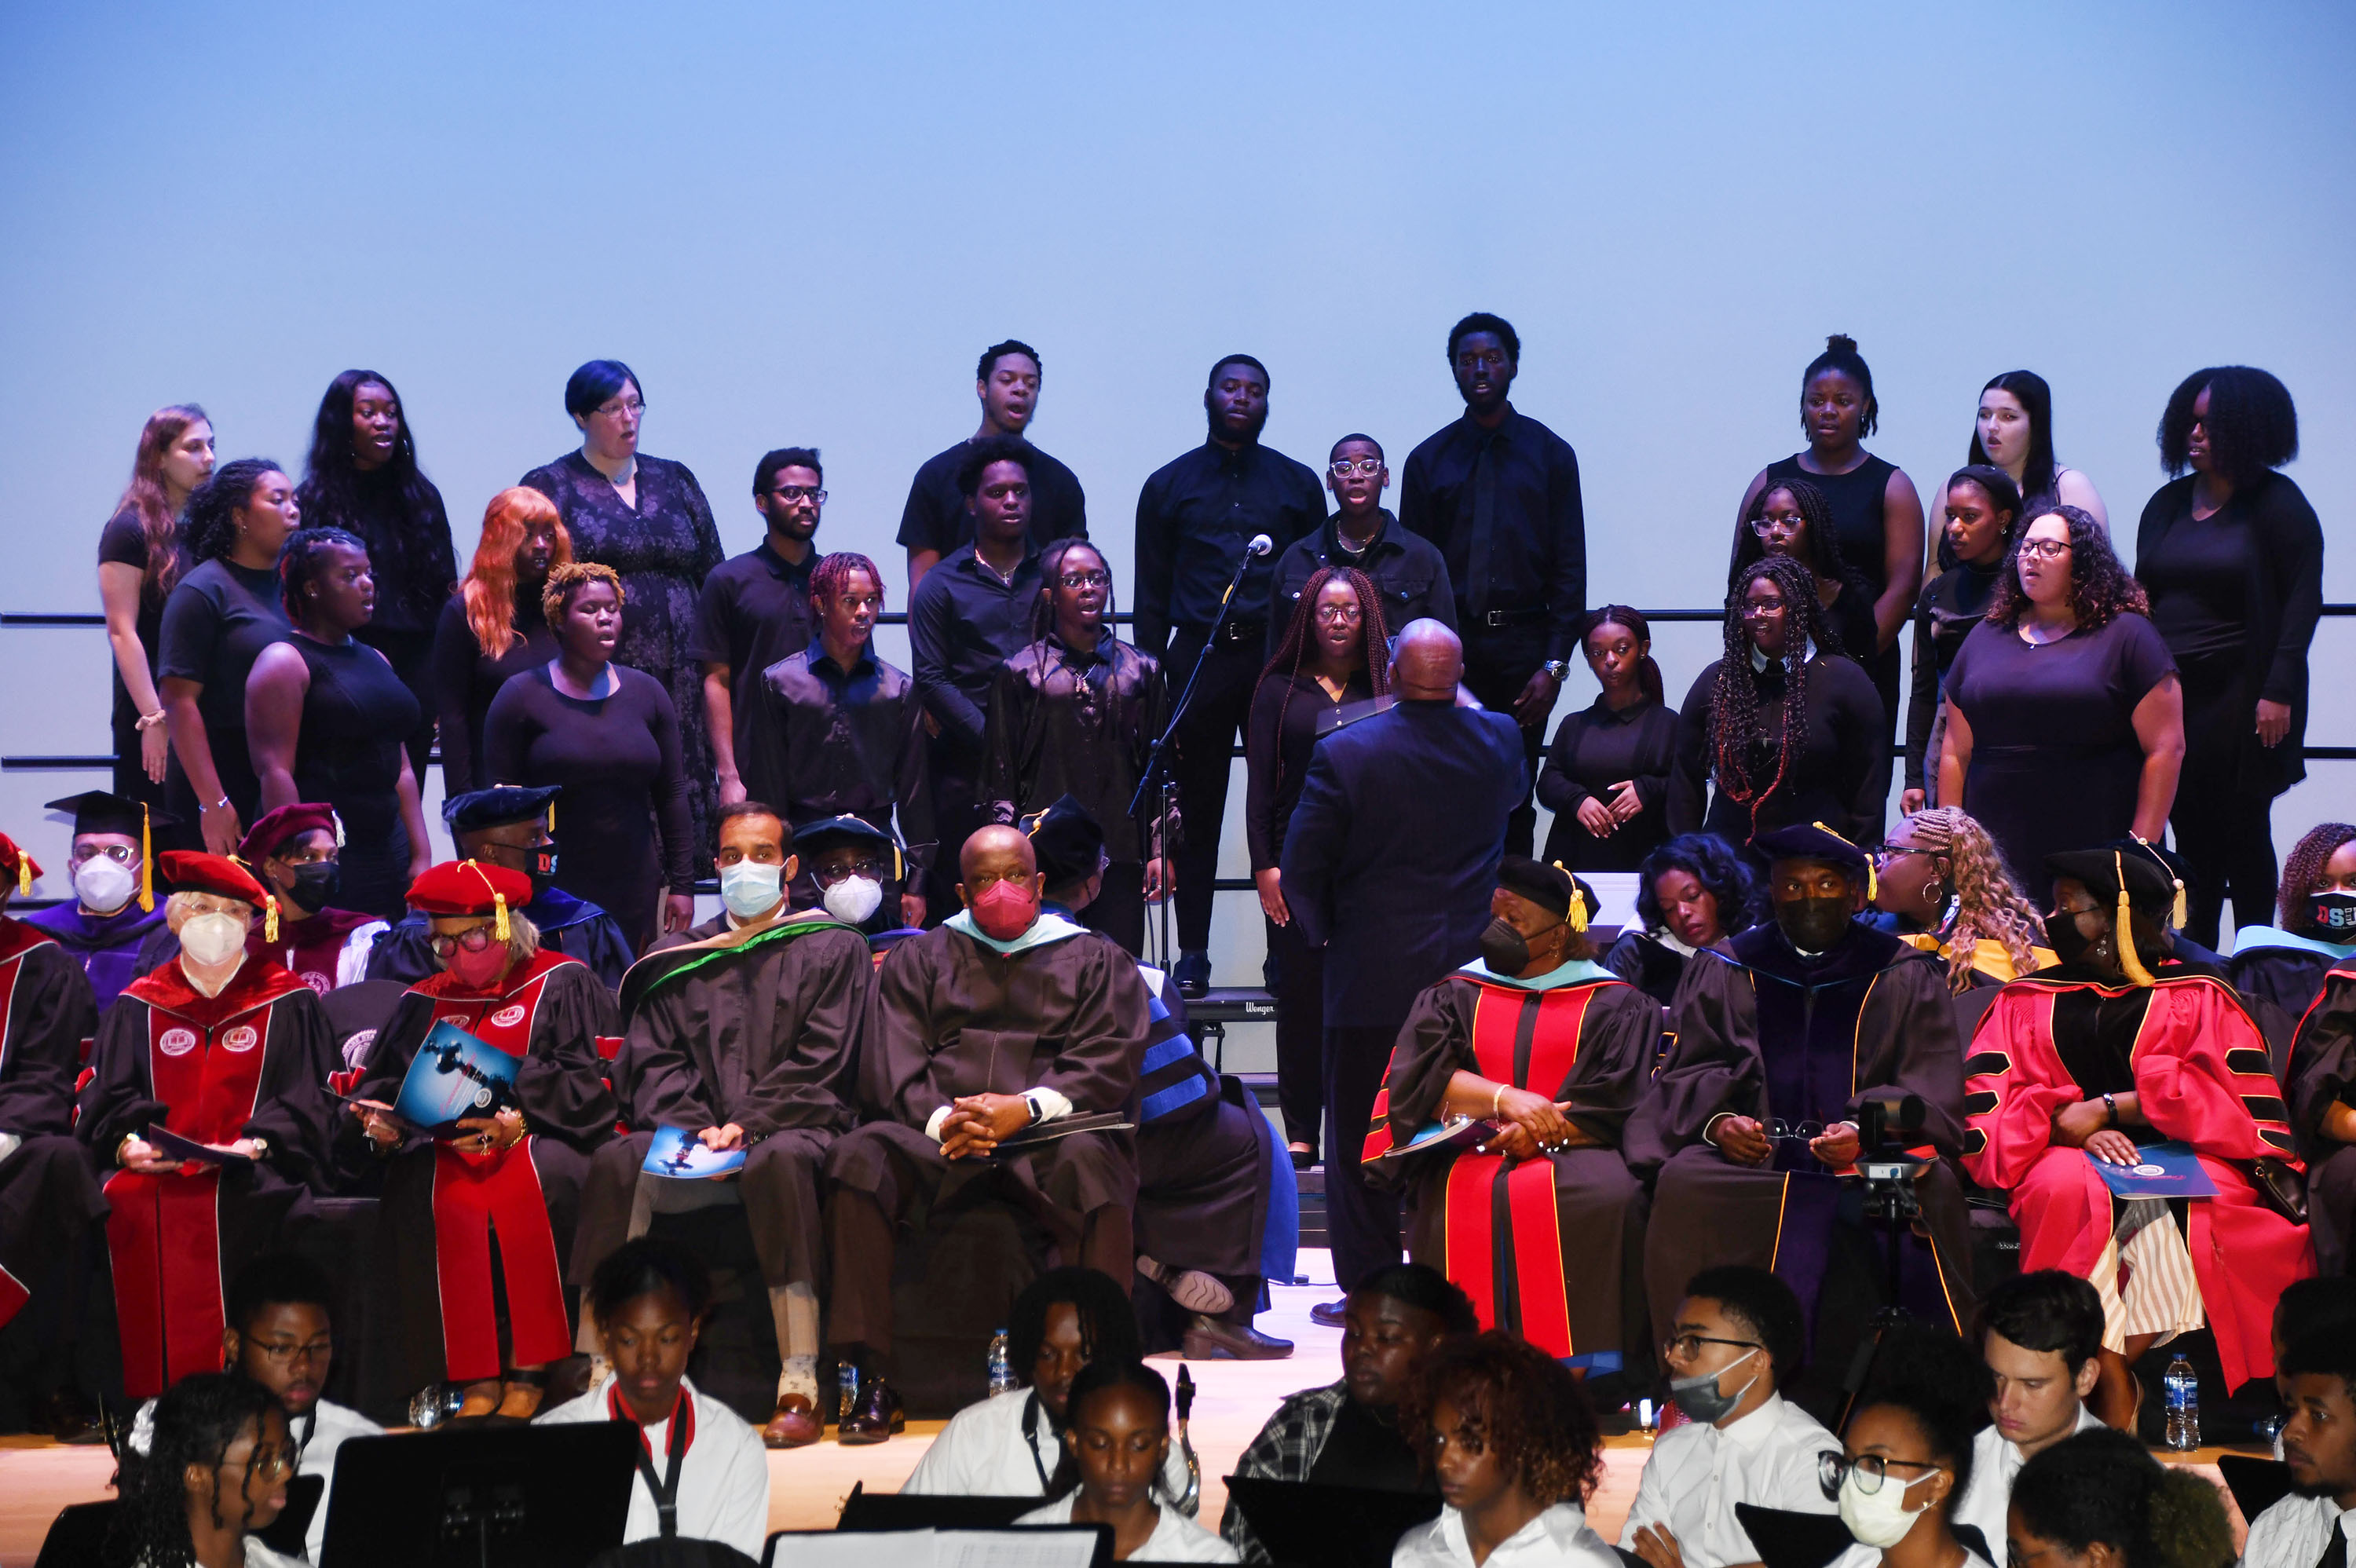 The Convocation was also the debut of the 2022-2023 University Concert Choir